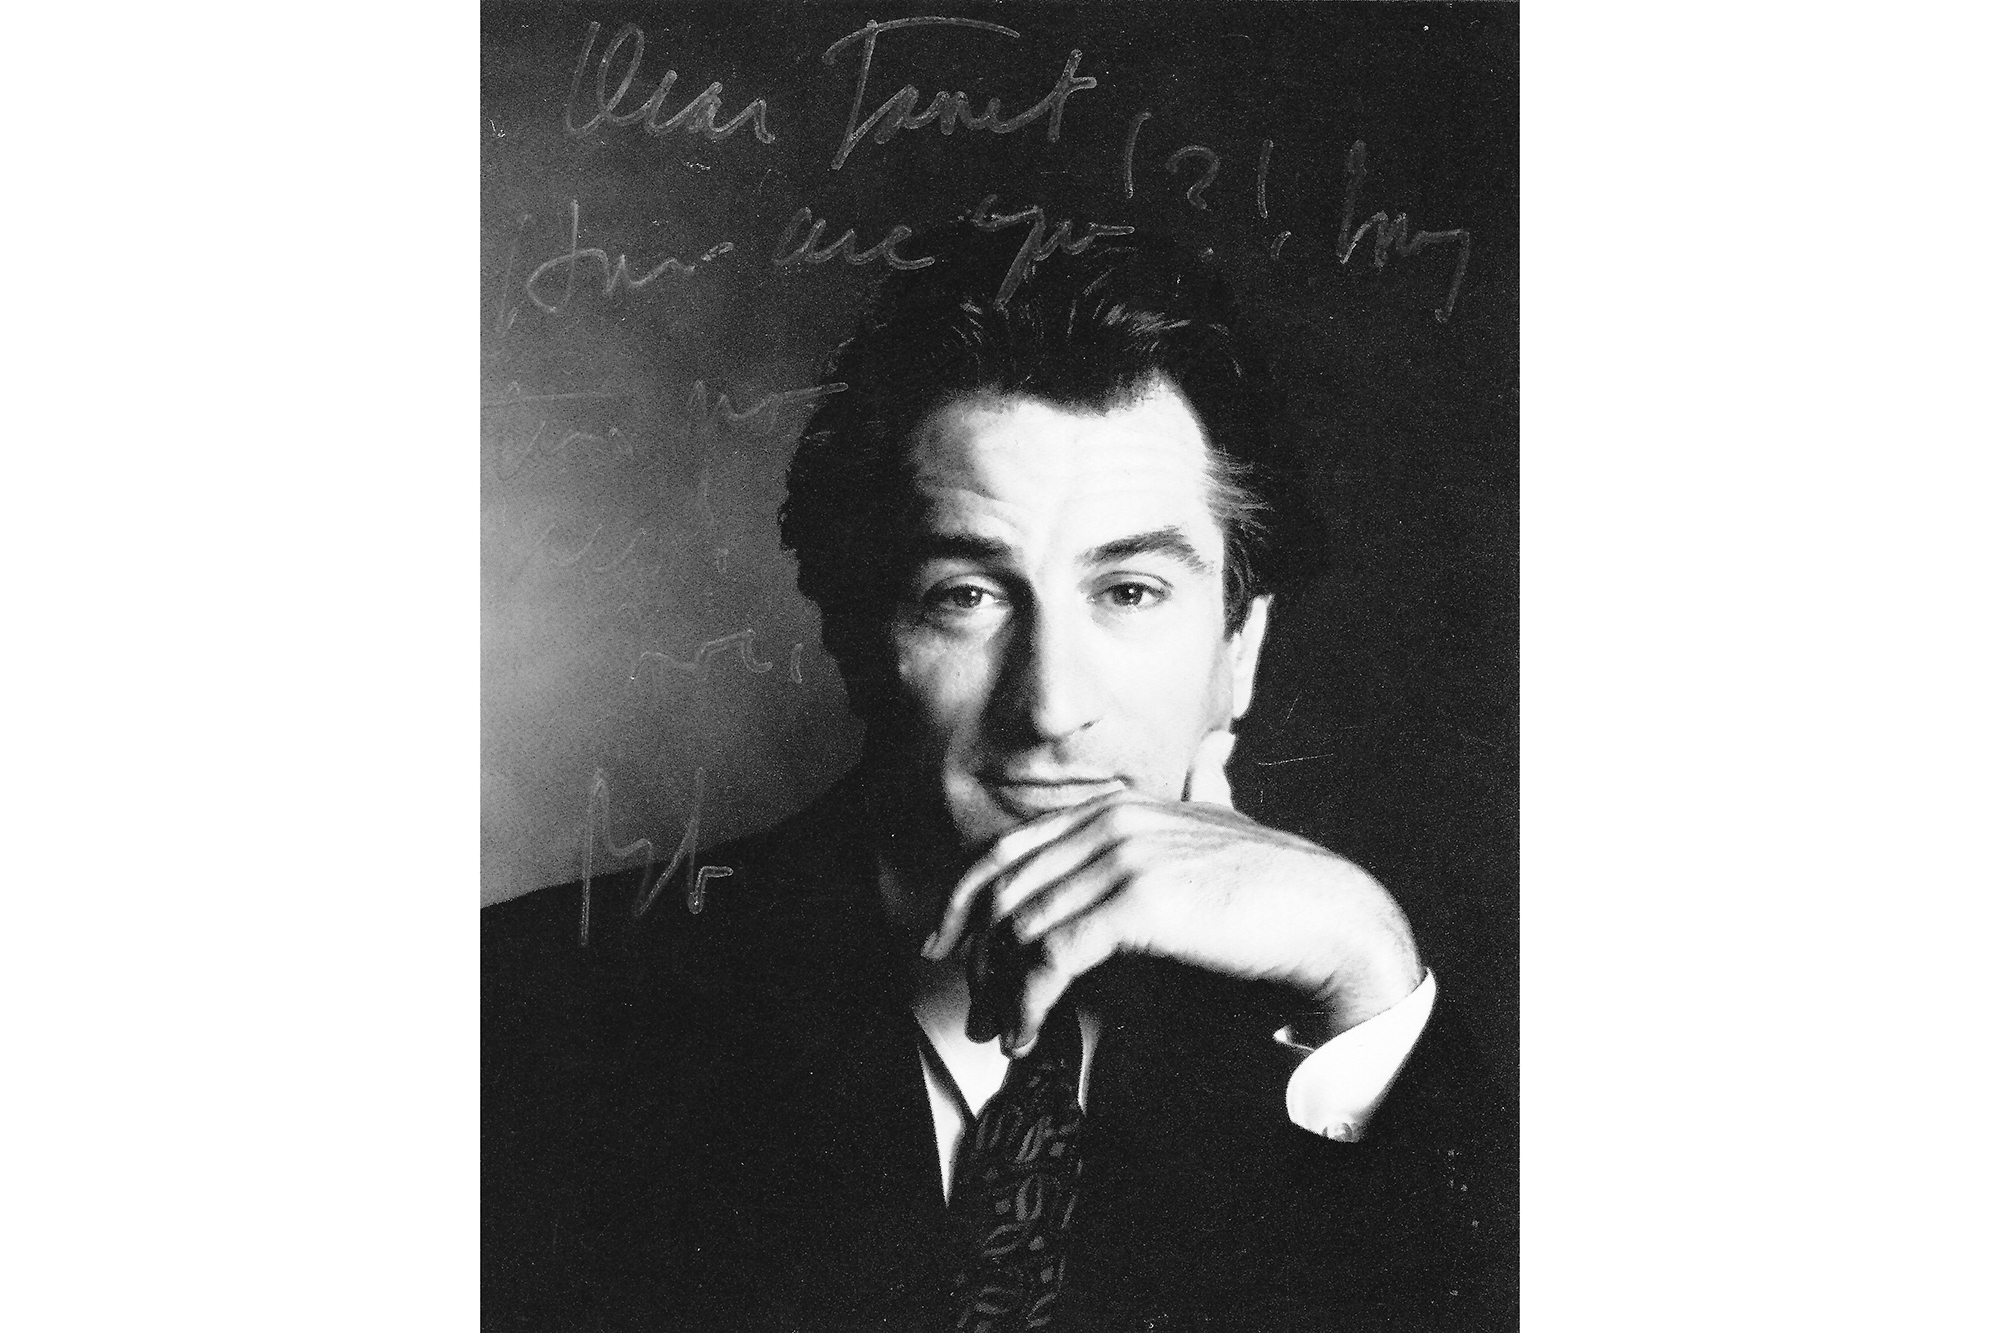 a headshot of robert dinero with an autograph and note to janet